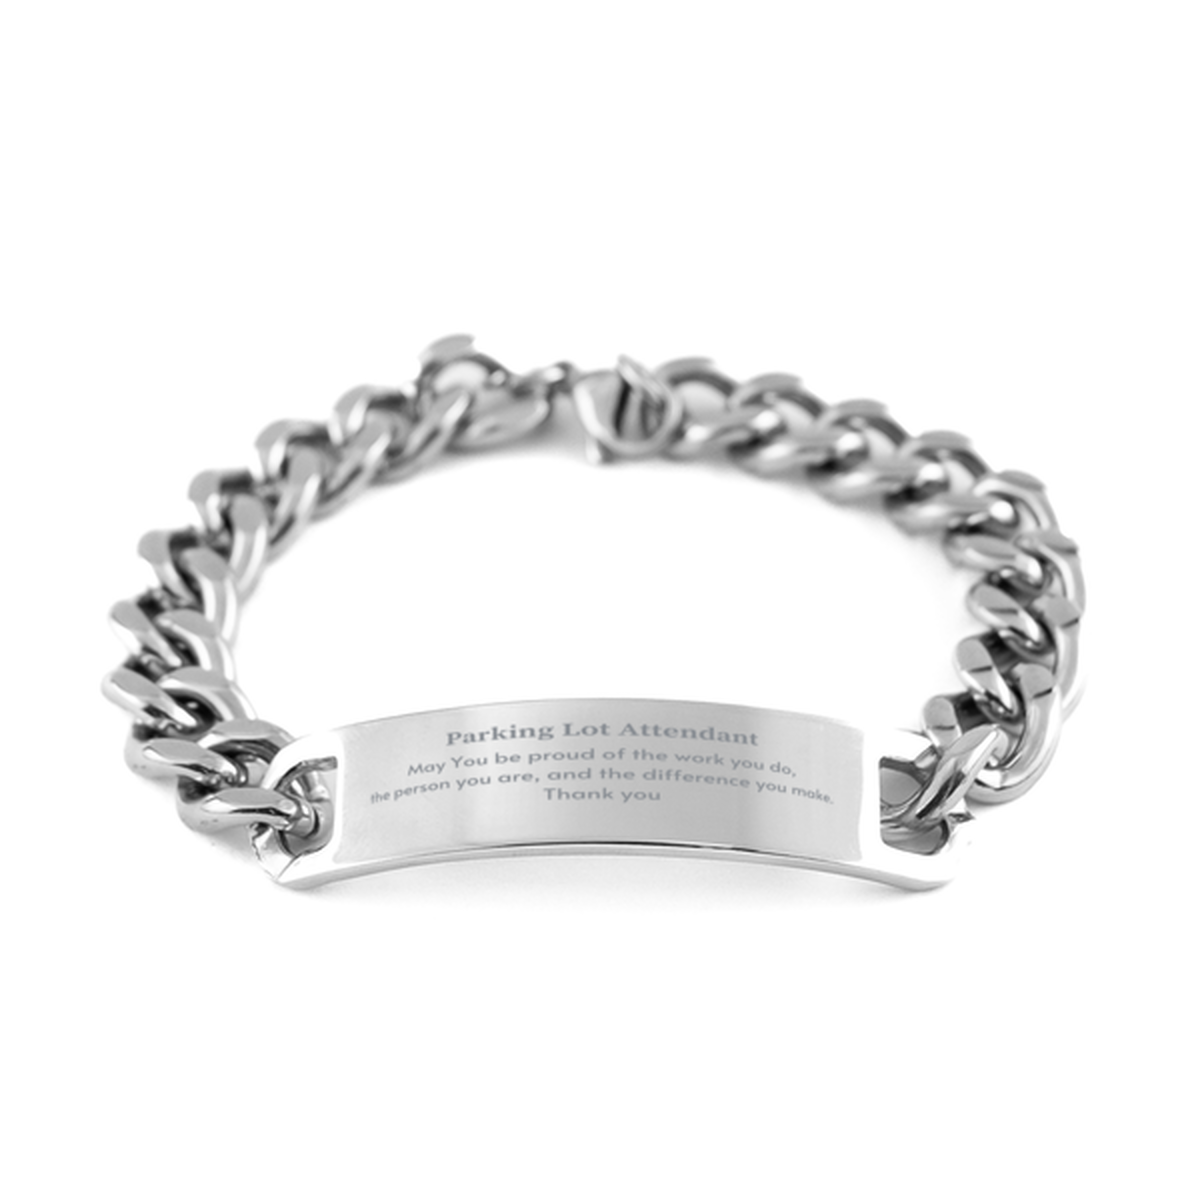 Heartwarming Cuban Chain Stainless Steel Bracelet Retirement Coworkers Gifts for Parking Lot Attendant, Parking Lot Attendant May You be proud of the work you do, the person you are Gifts for Boss Men Women Friends